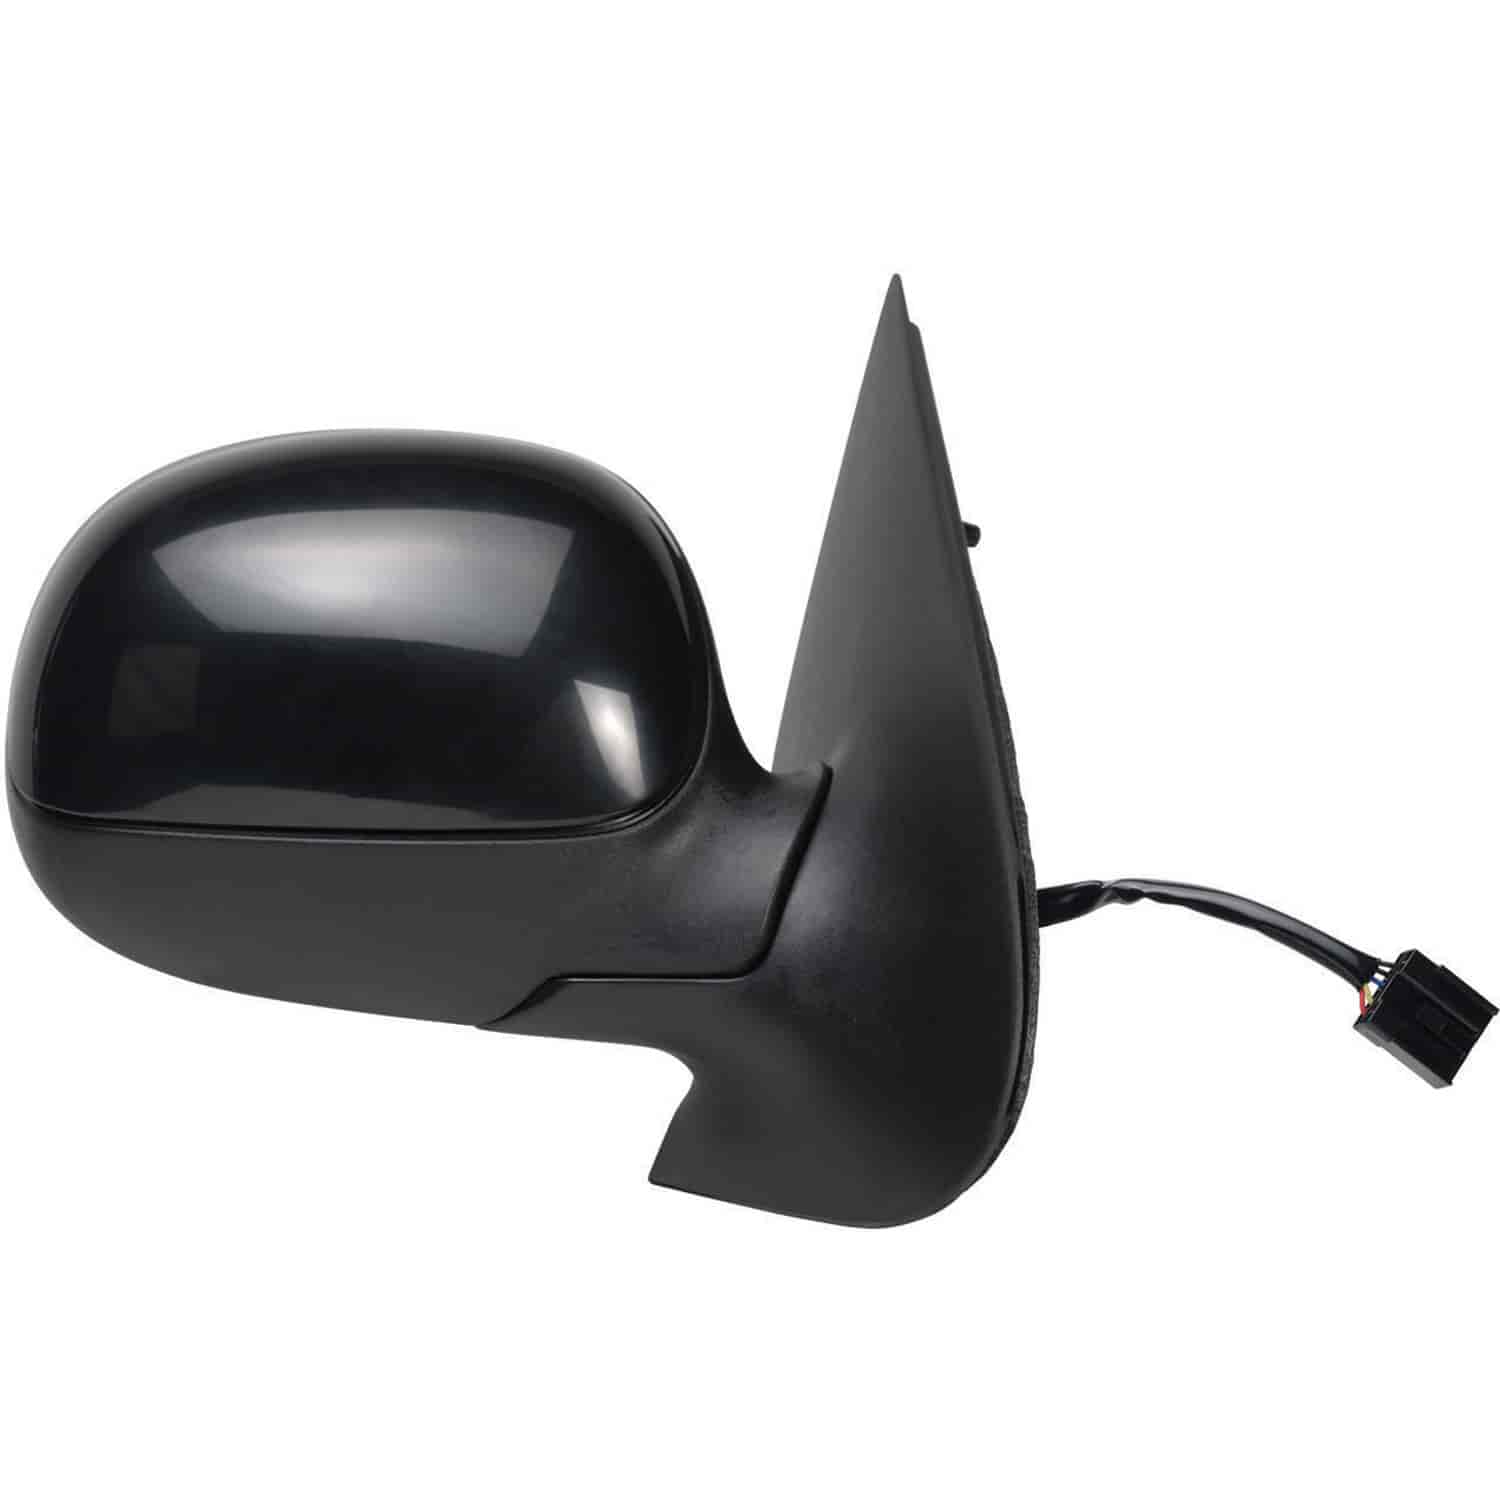 OEM Style Replacement mirror for 98-02 Exp/ Nav 98-03 F150/F250 LD Crew Cab passenger side mirror te